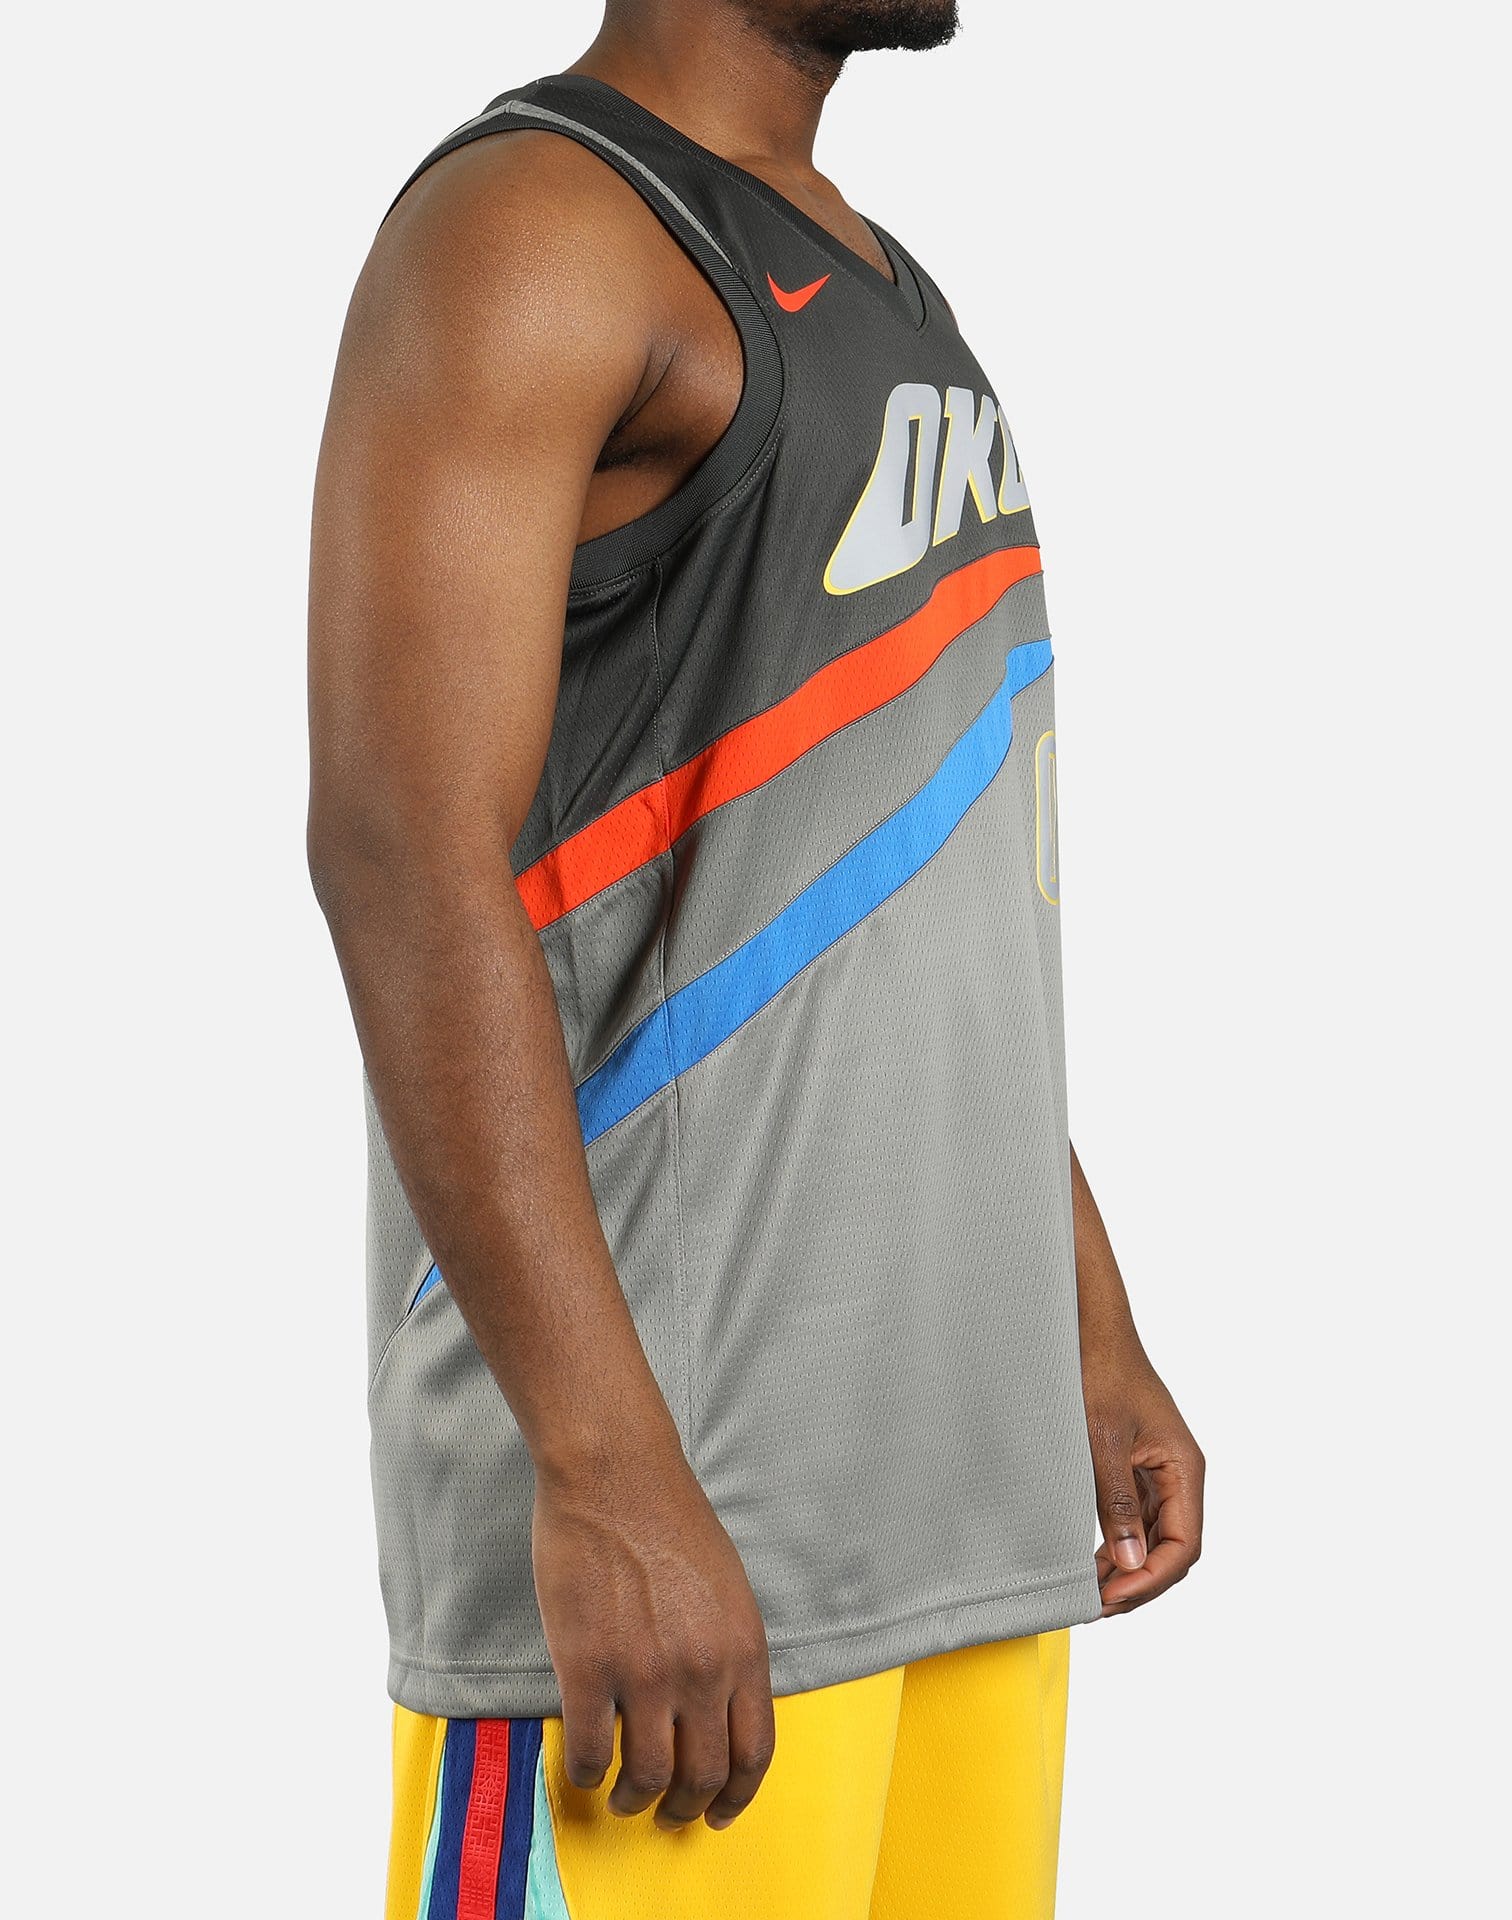 Youth L Nike Russell Westbrook OKC Thunder Icon Edition Swingman Jersey